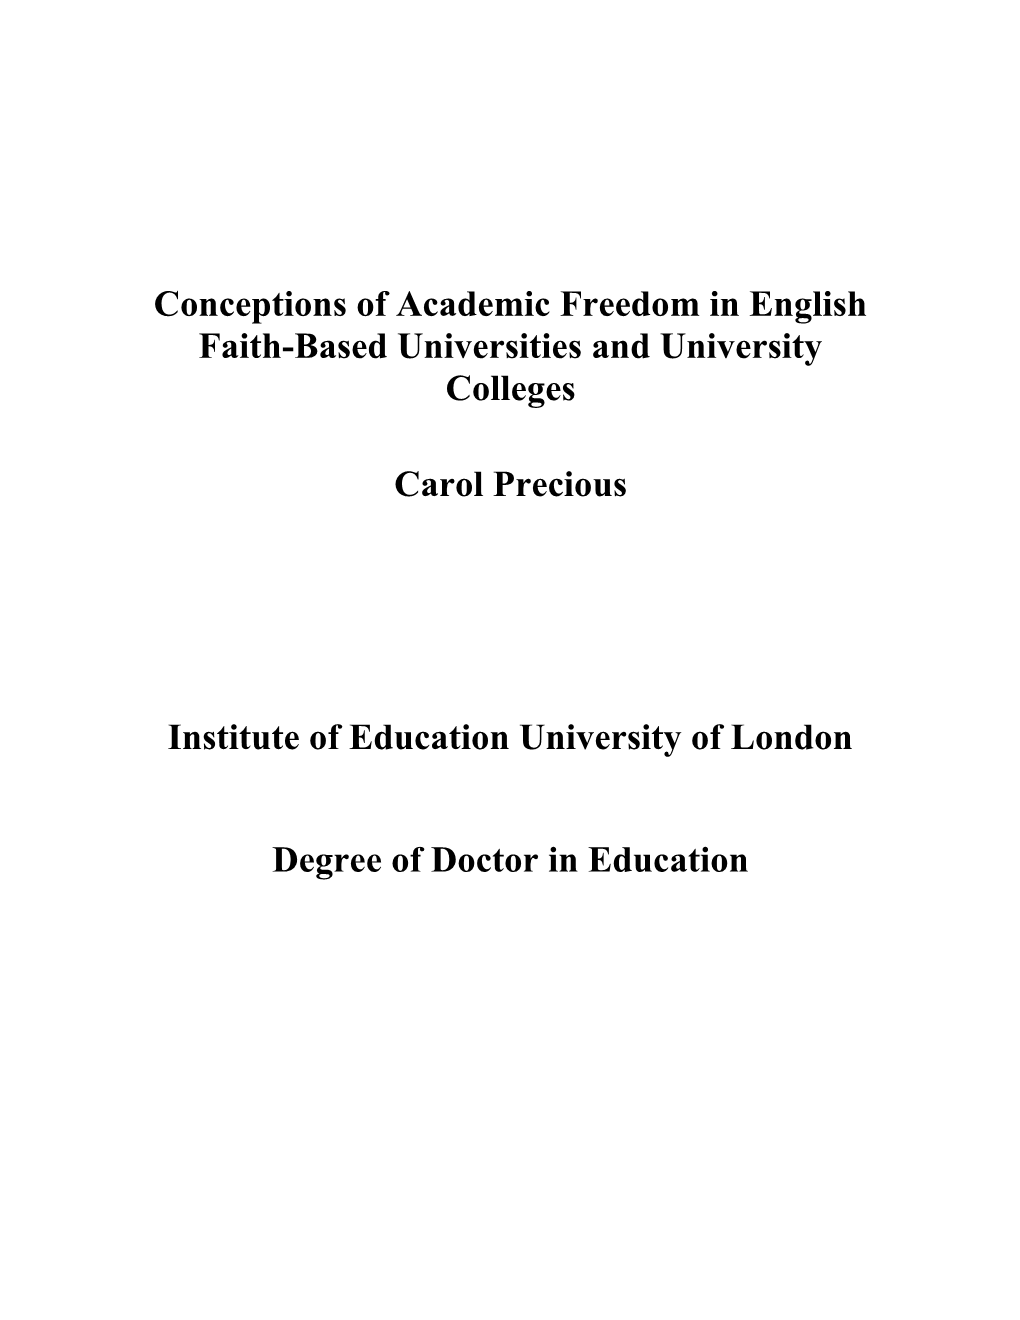 Conceptions of Academic Freedom in English Faith-Based Universities and University Colleges